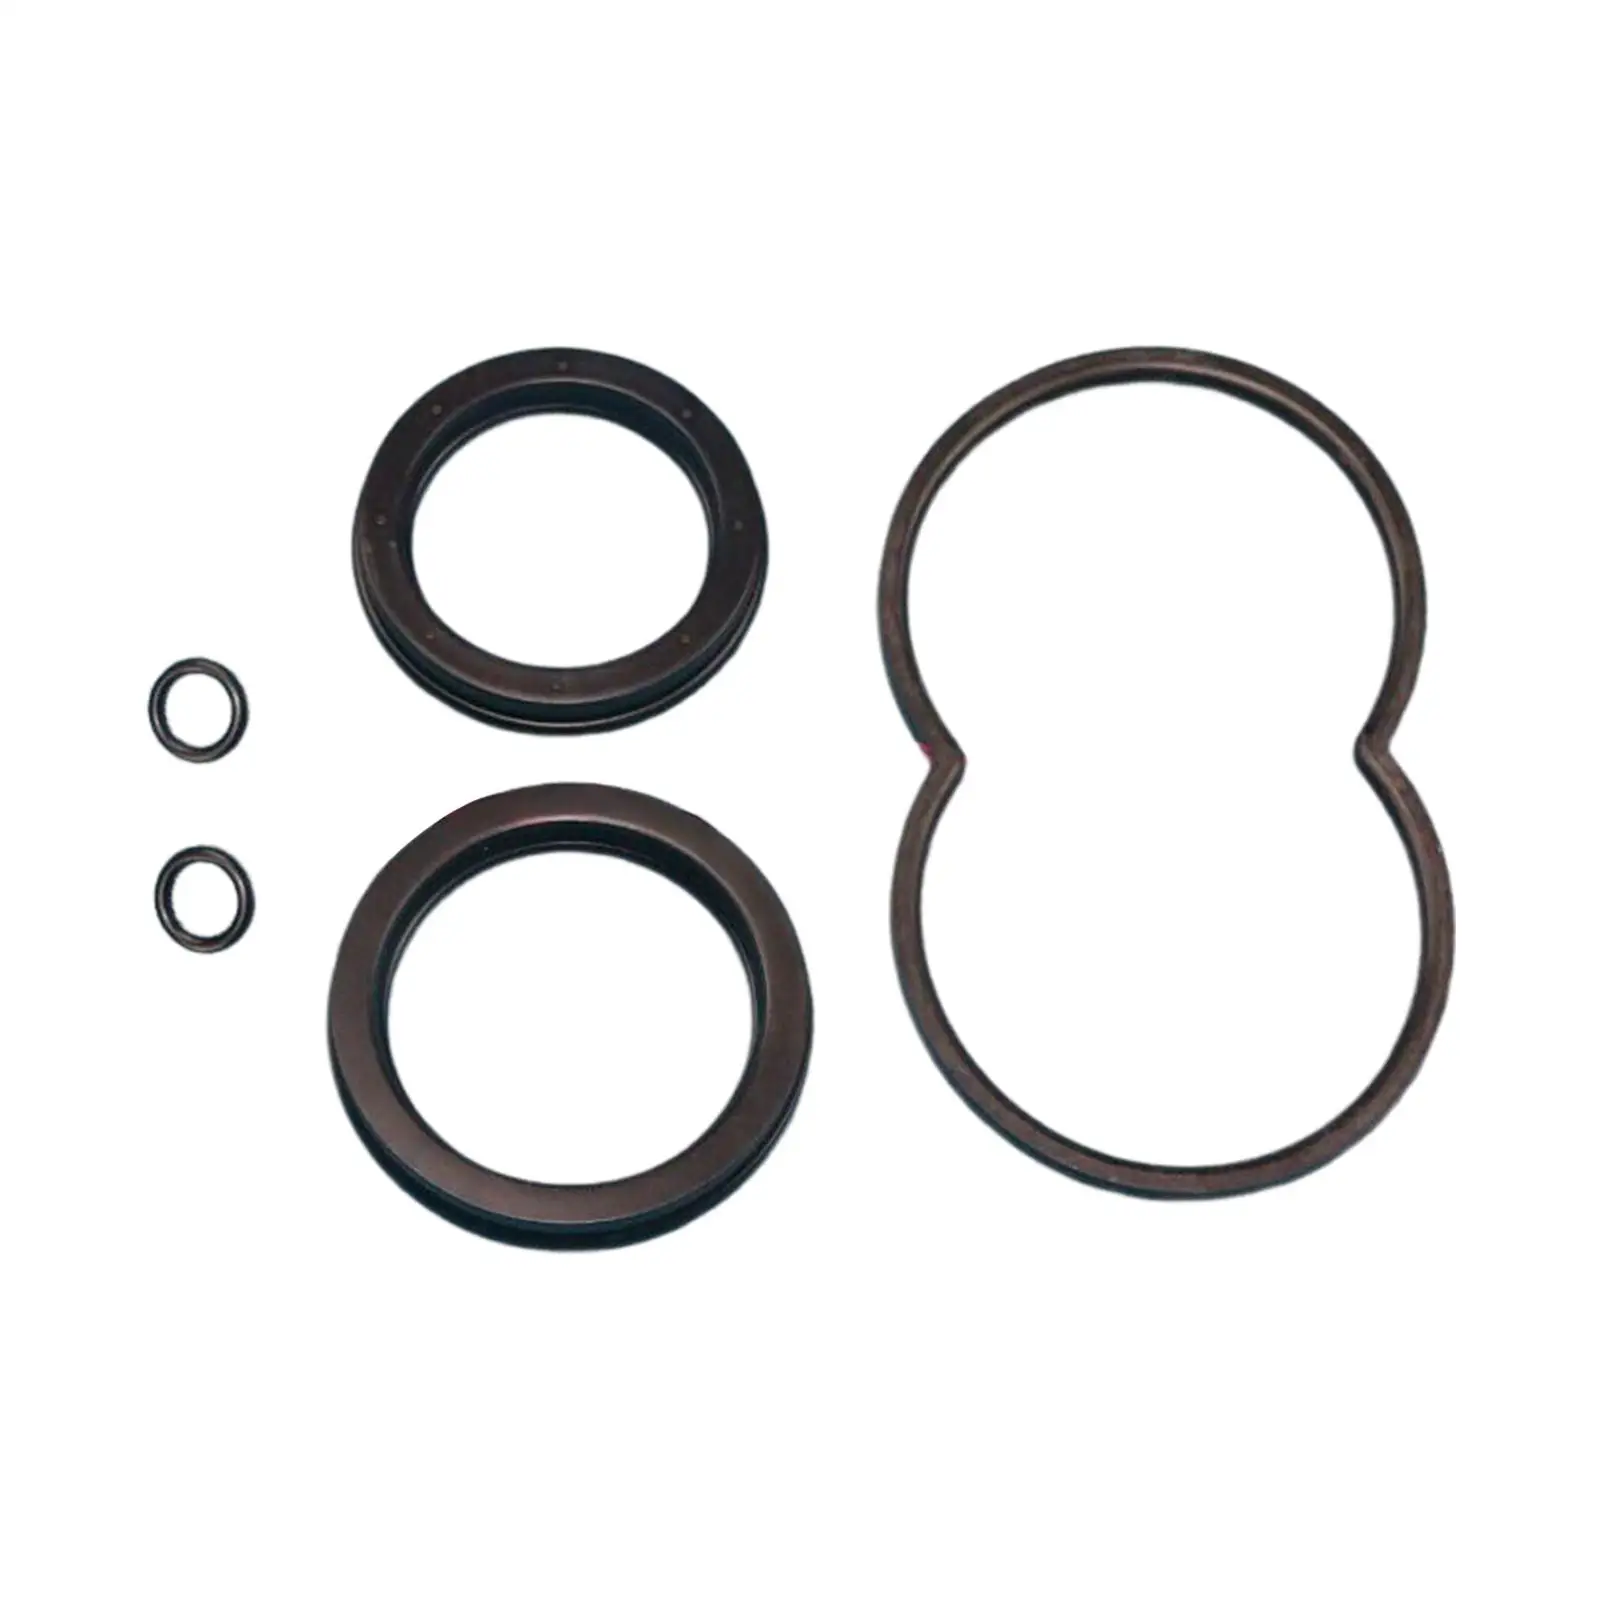 2771004 Seal Leak Repair Kits Fittings Stable 5 Pieces Seal Kits for